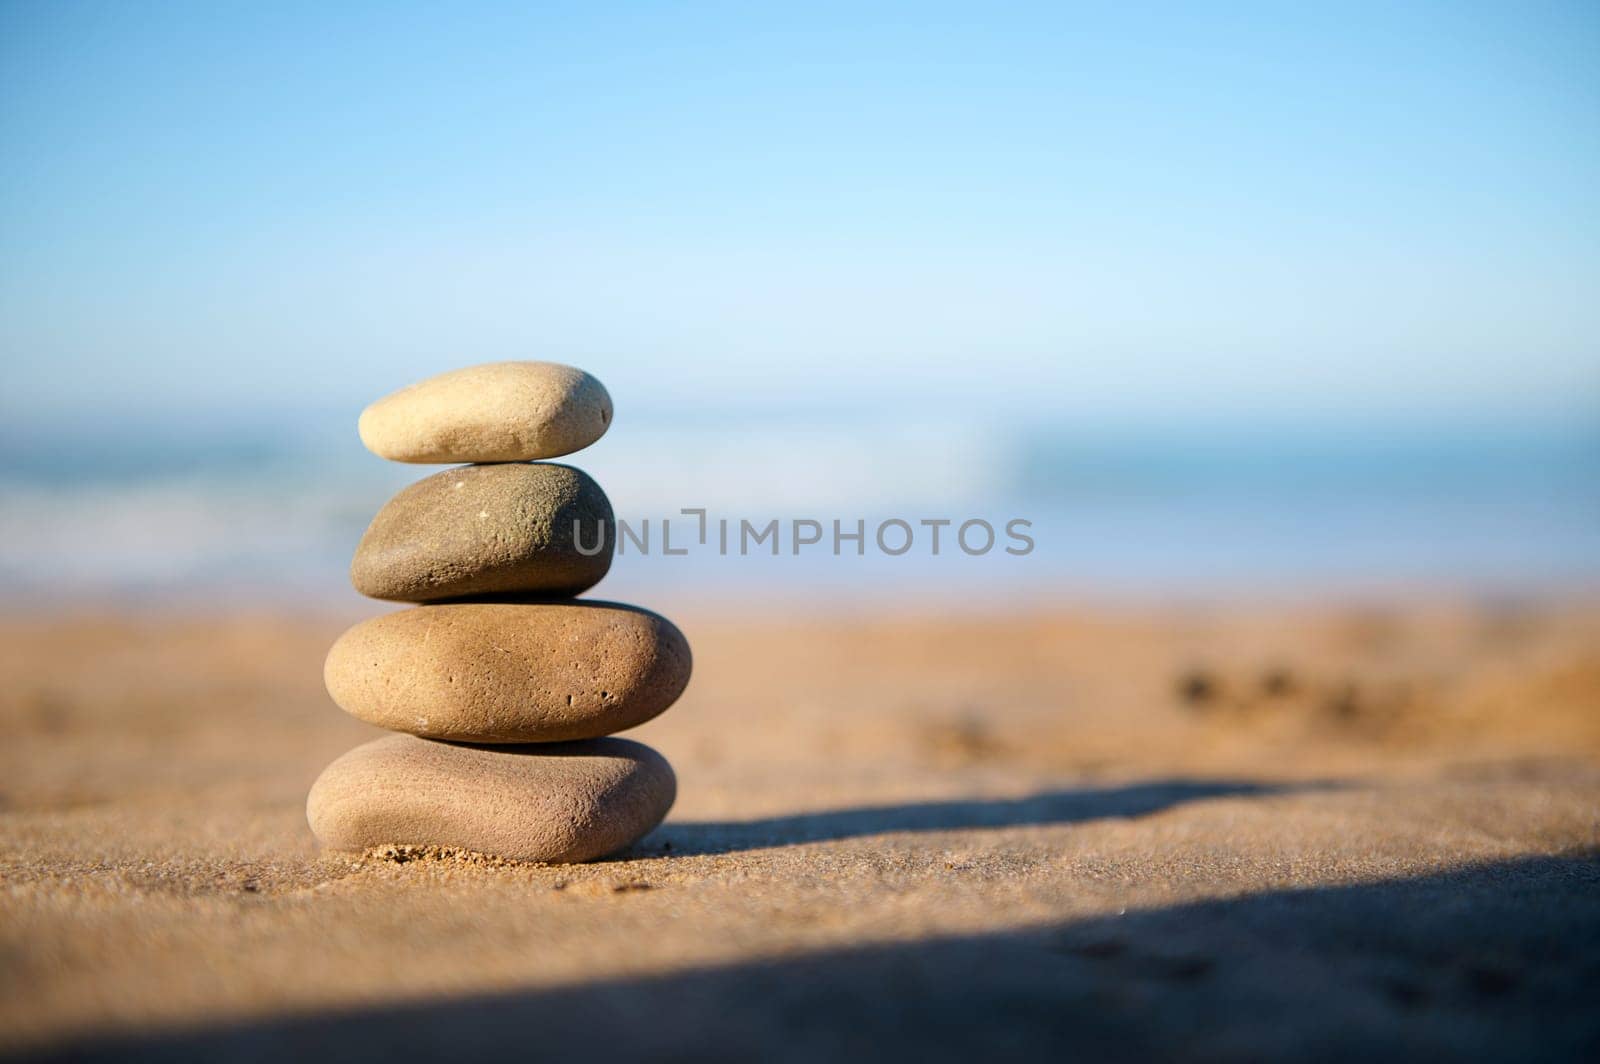 Still life with stacked pebbles, stones on the sandy beach against the background of Atlantic ocean with breaking waves by artgf